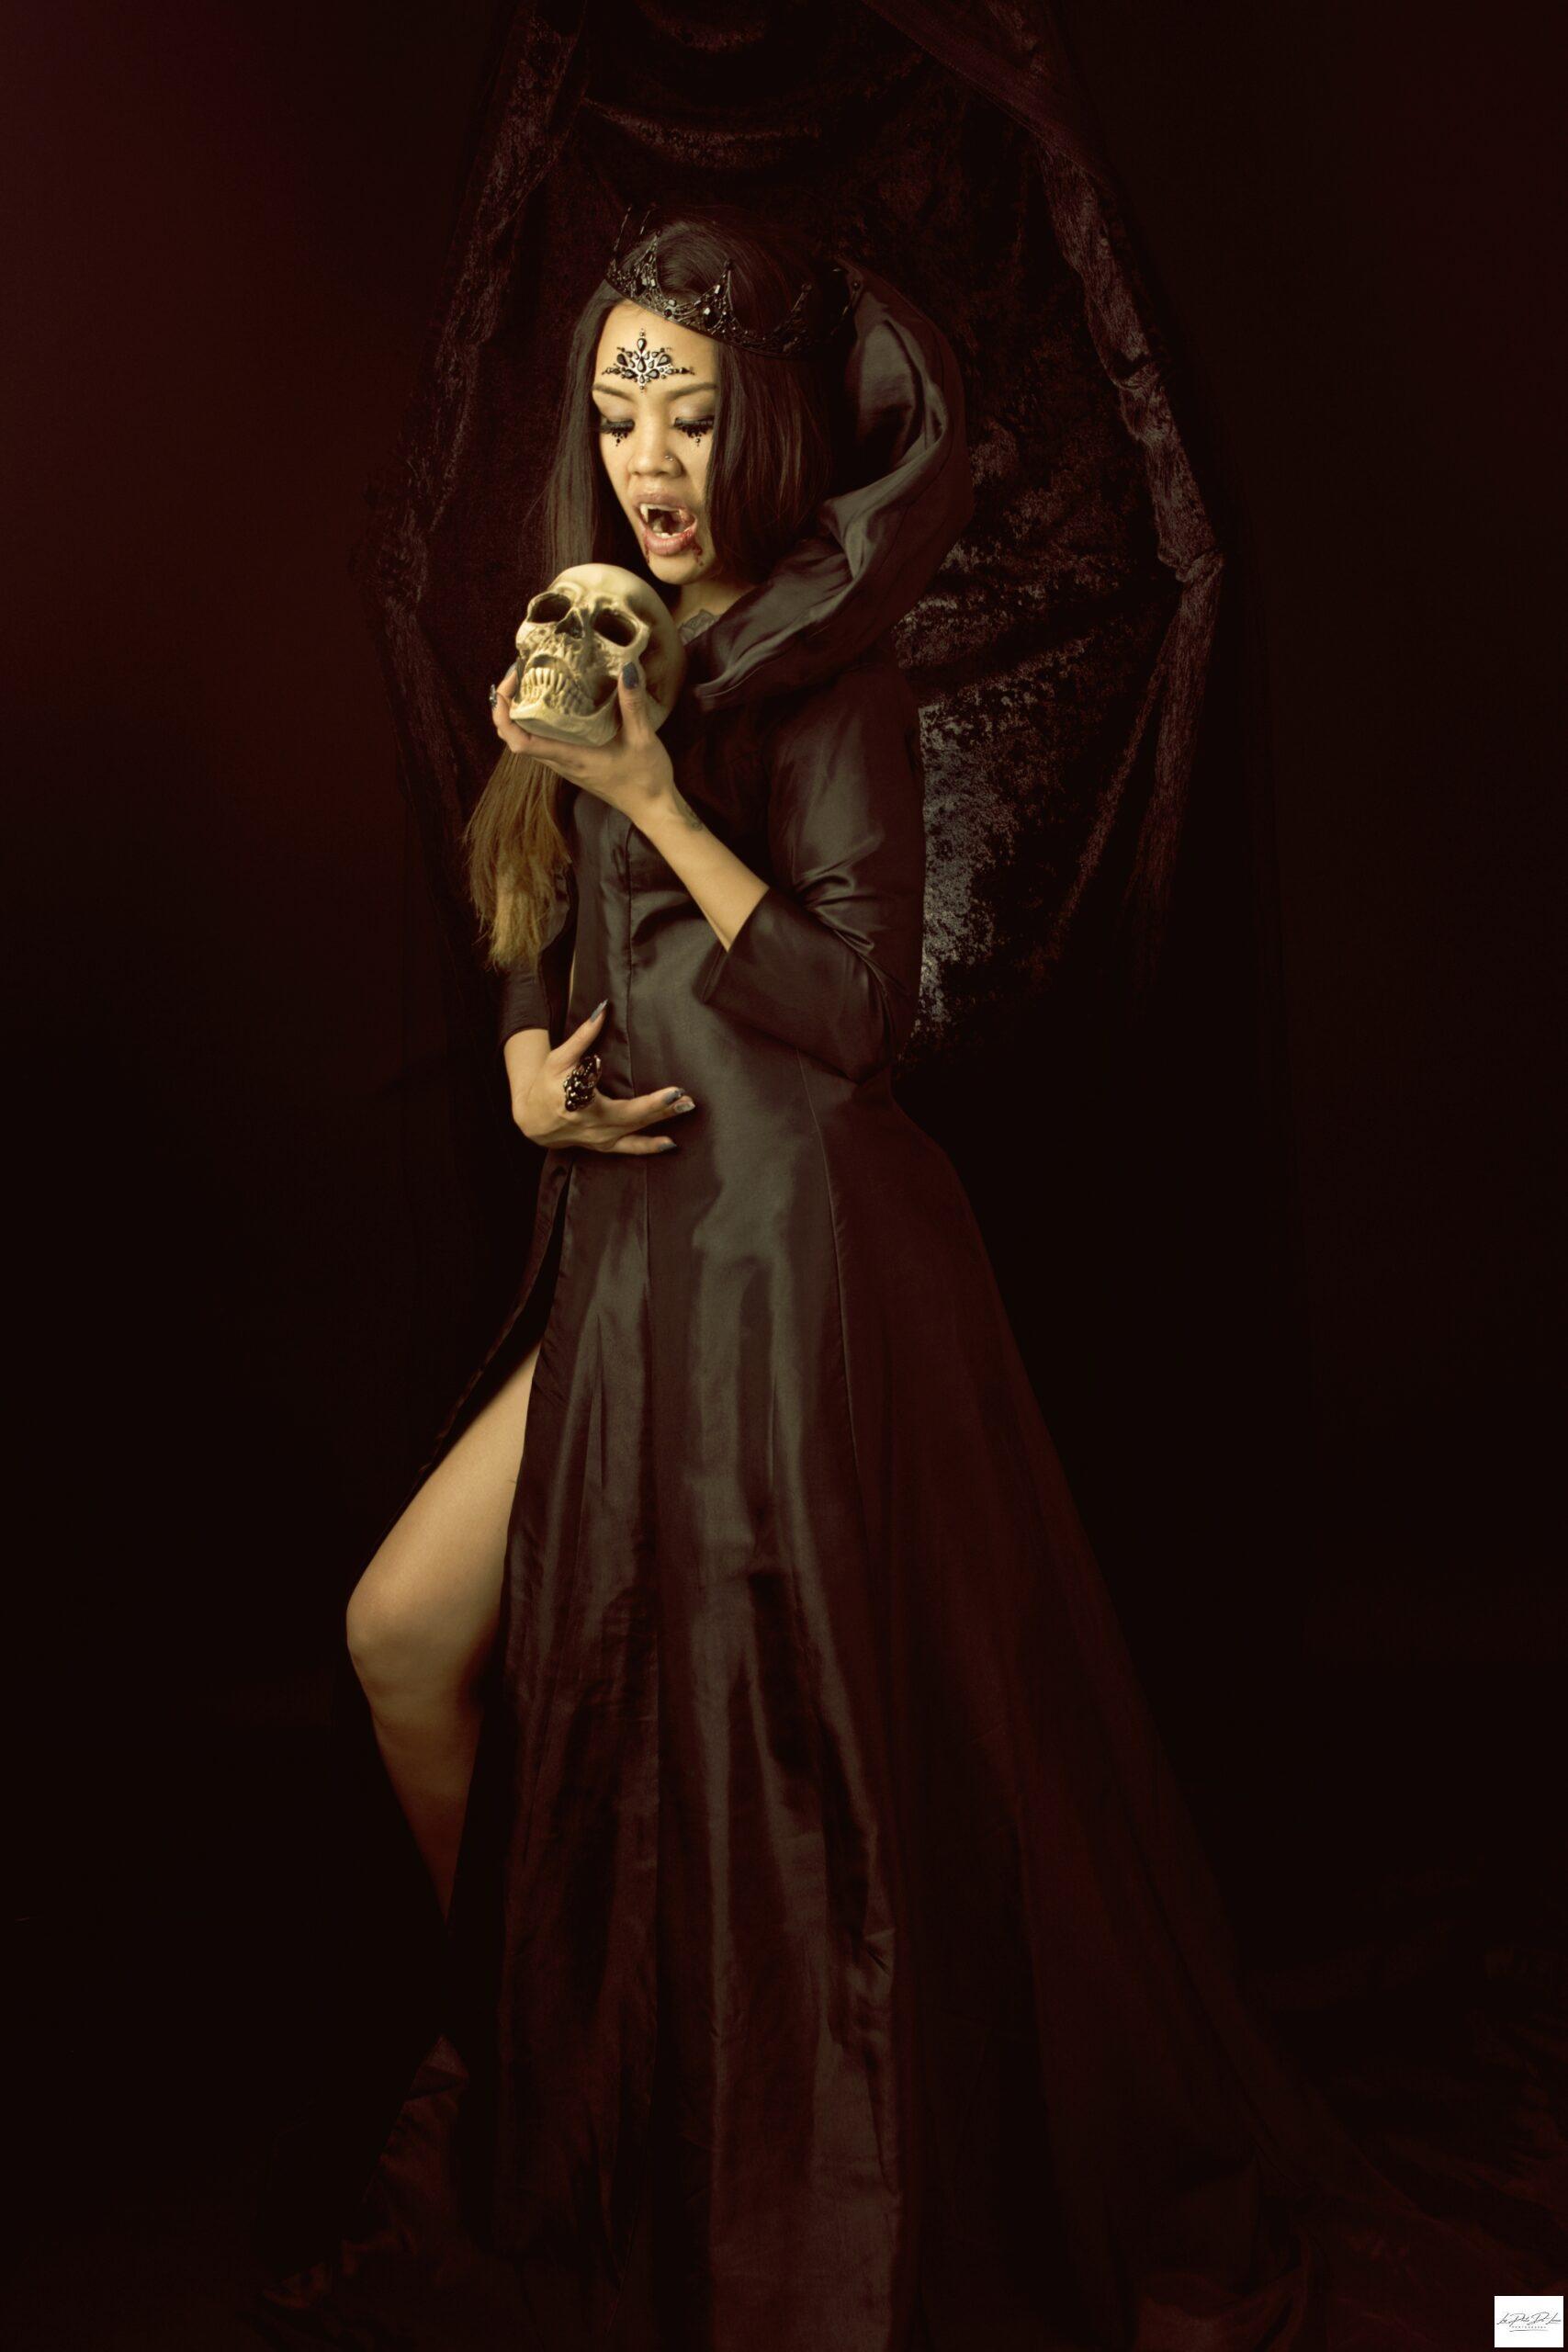 Vampire woman holding a skull posing as the queen of the dark